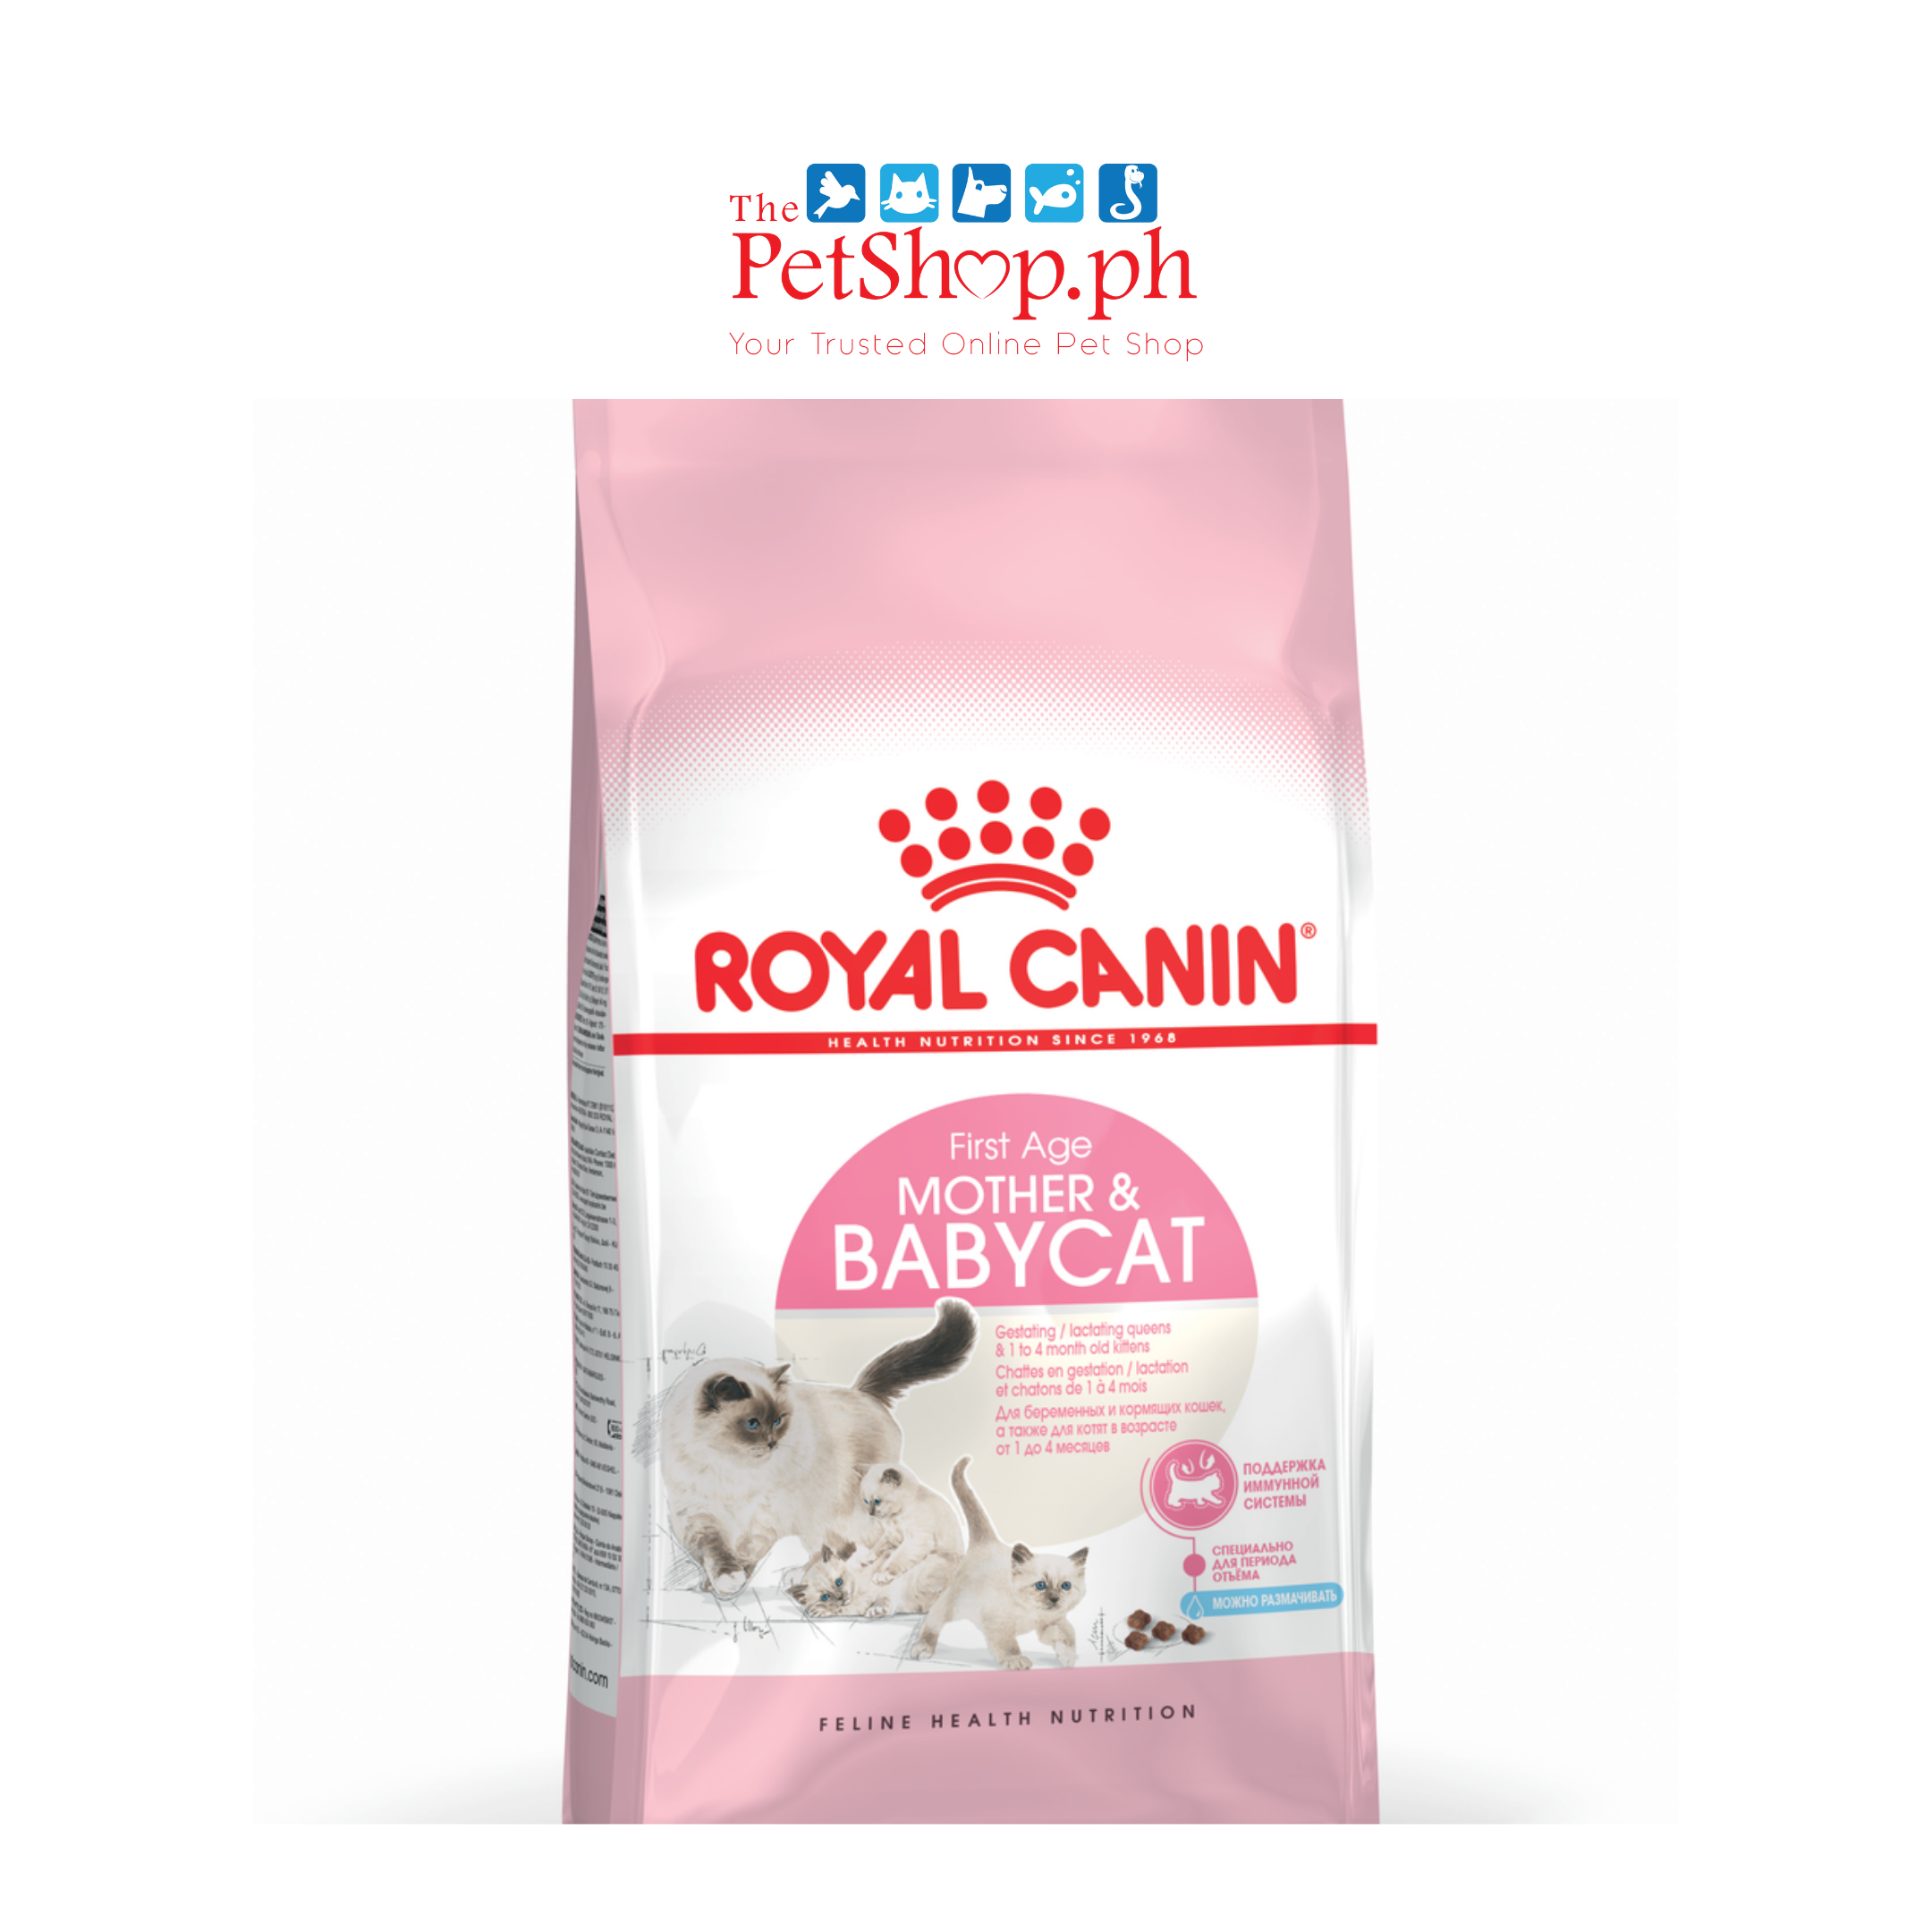 Royal Canin Mother & Babycat Dry Cat Food 400g